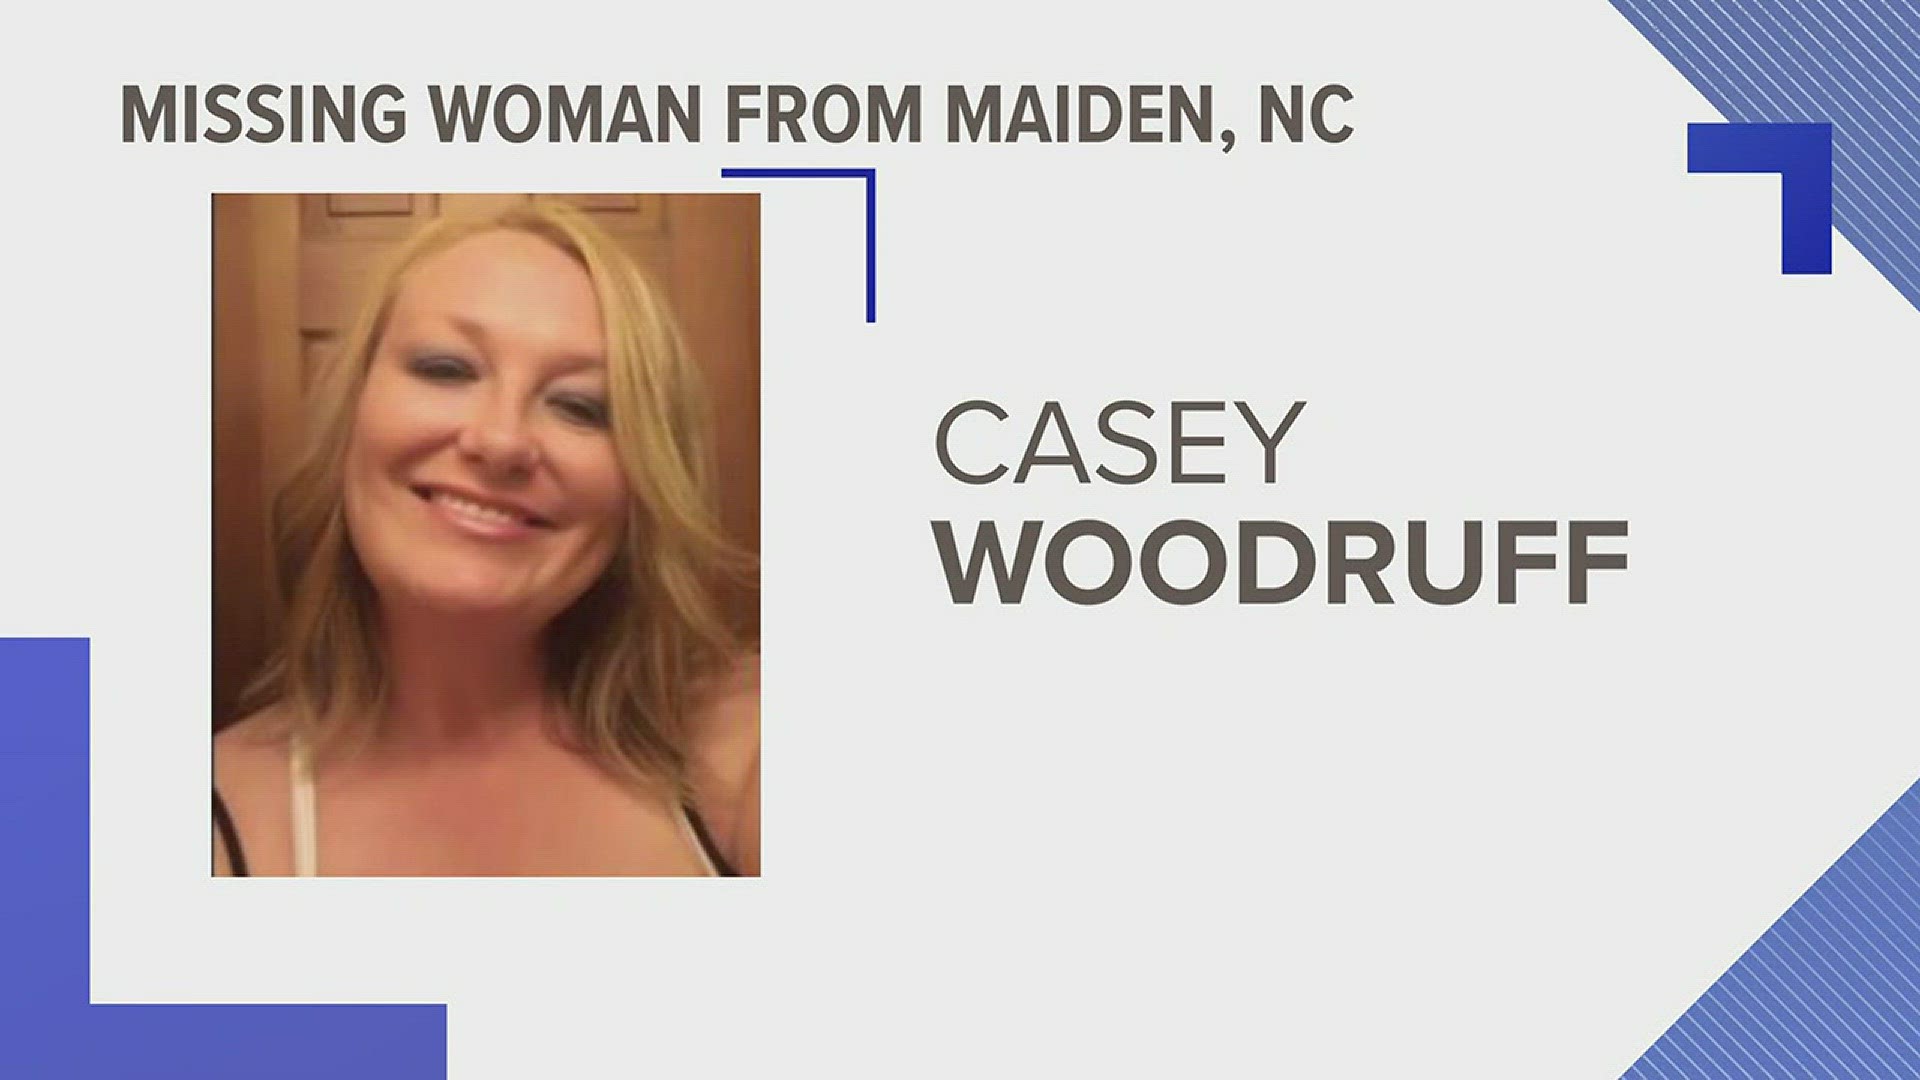 Catawba County Sheriff's Office is asking for the public's assistance in locating a missing Maiden woman.